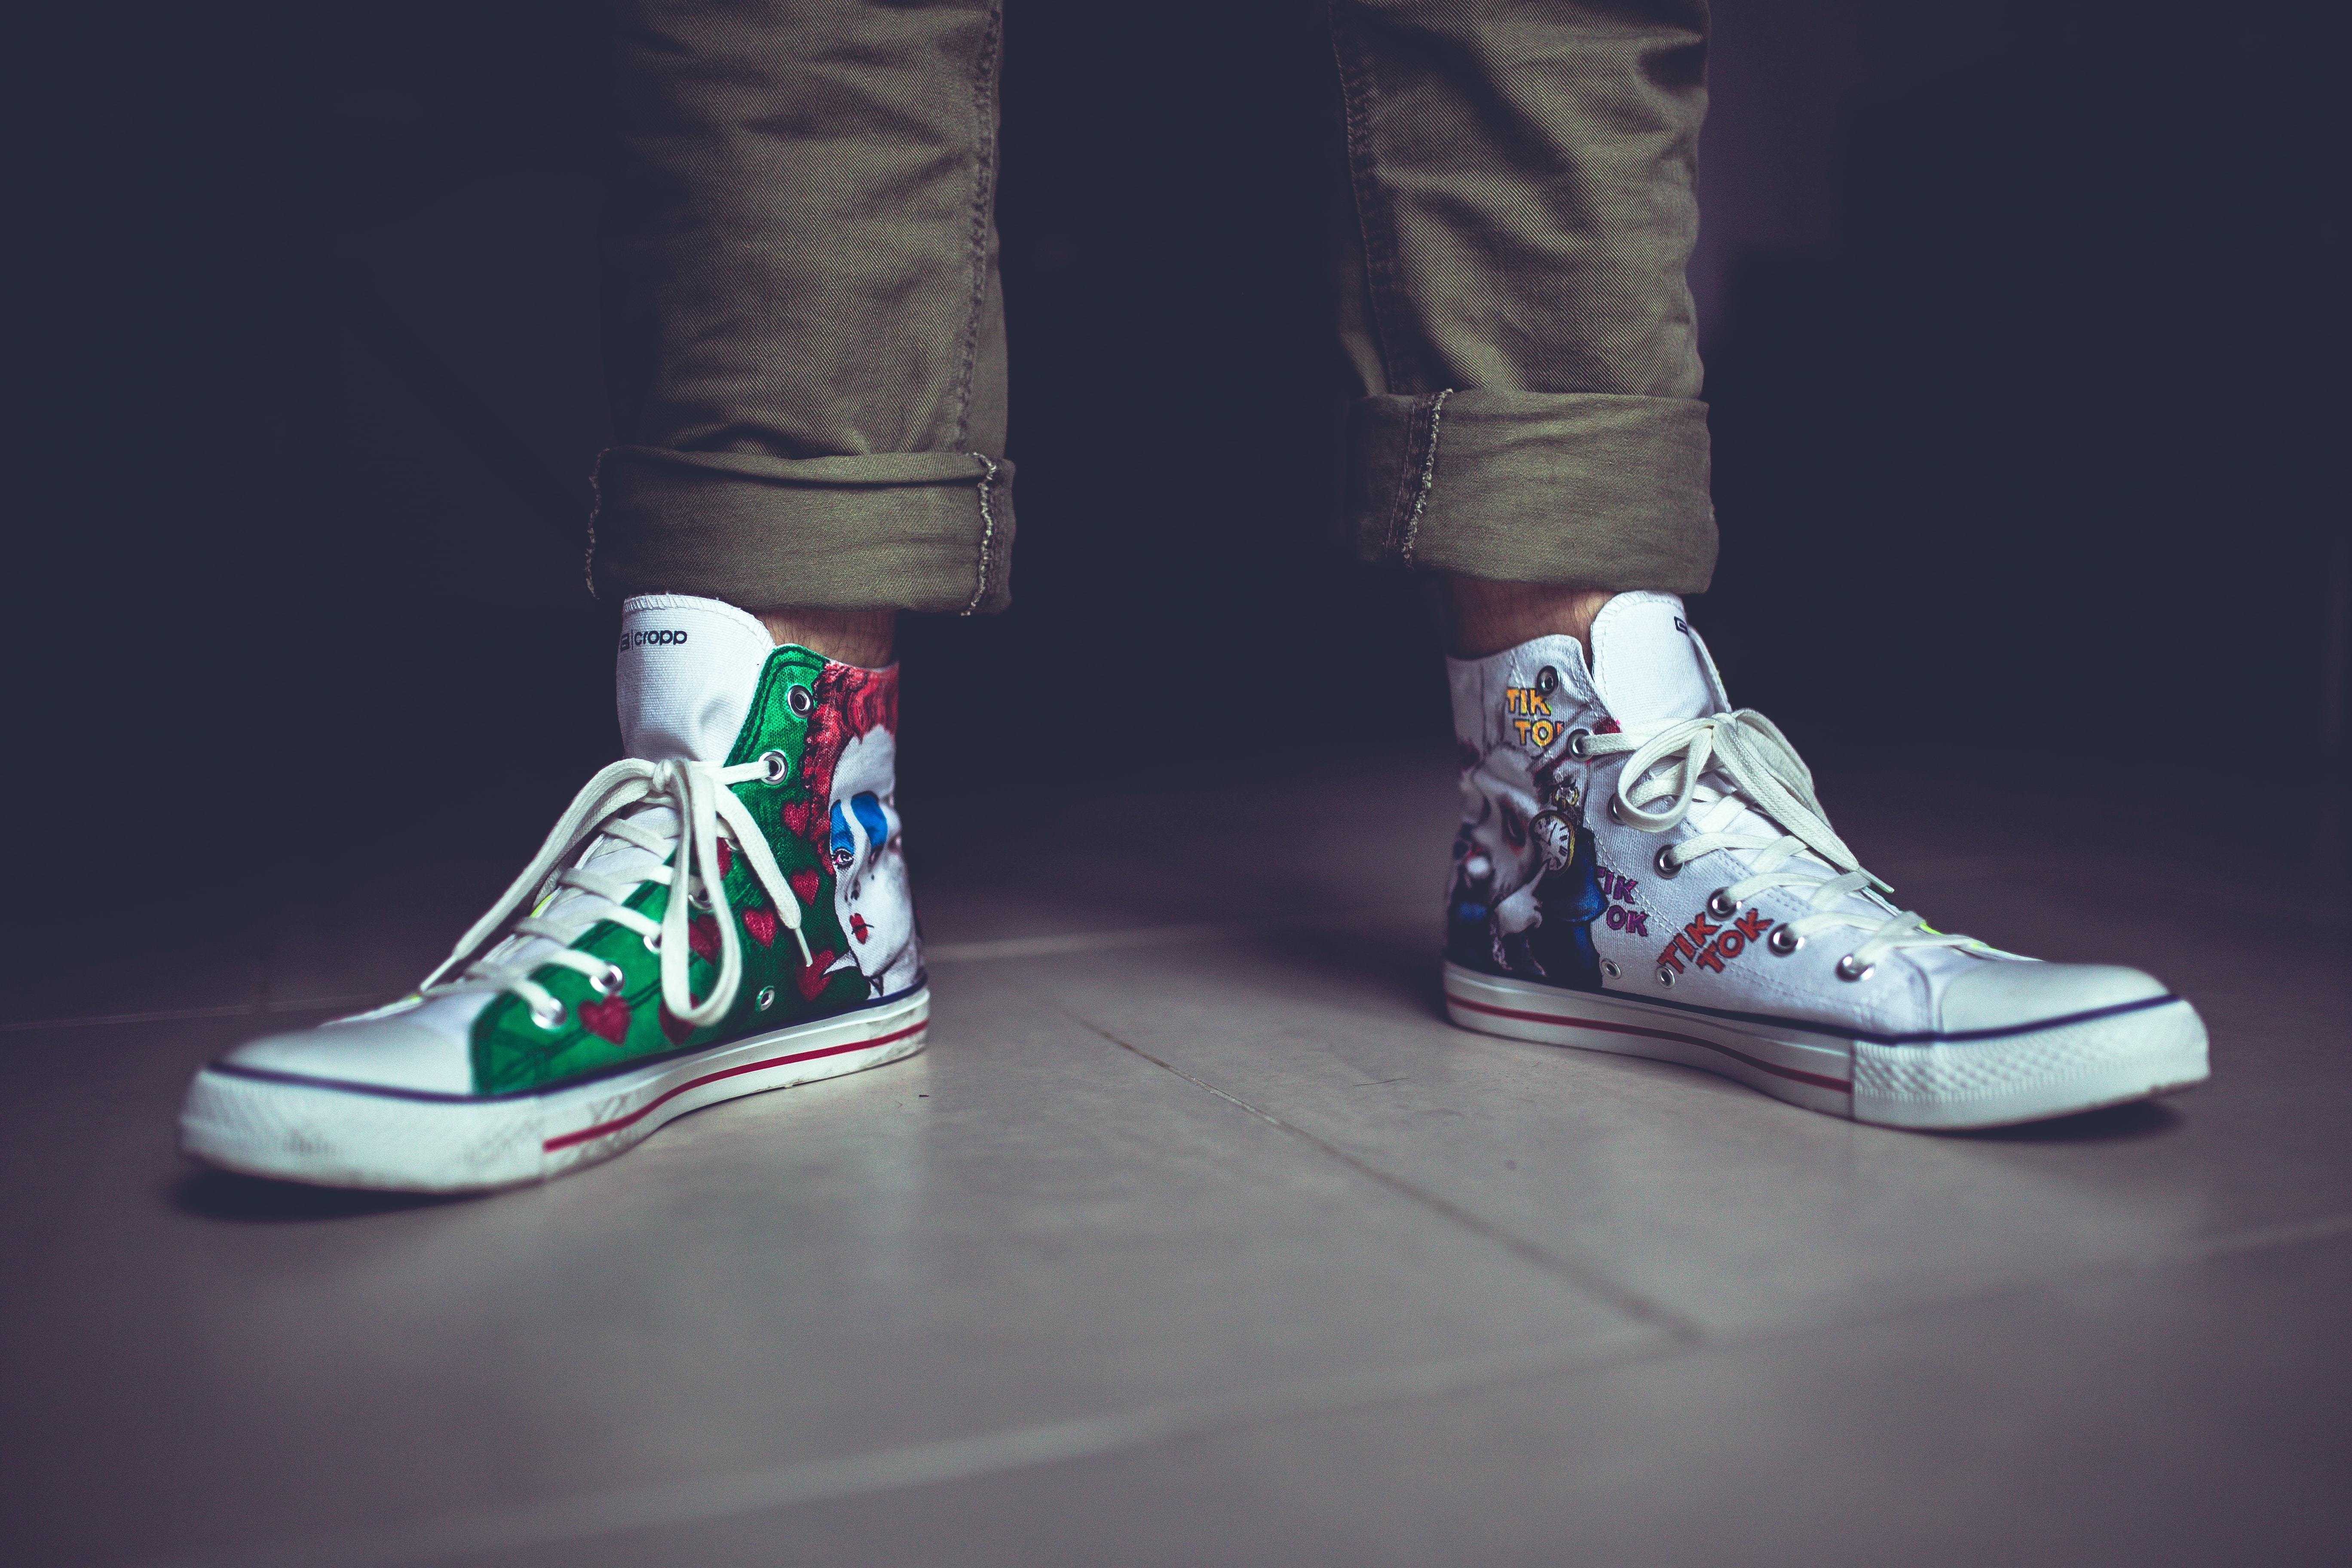 A person's feet wearing a pair of hi-tops covered in colourful graphics, with long laces.